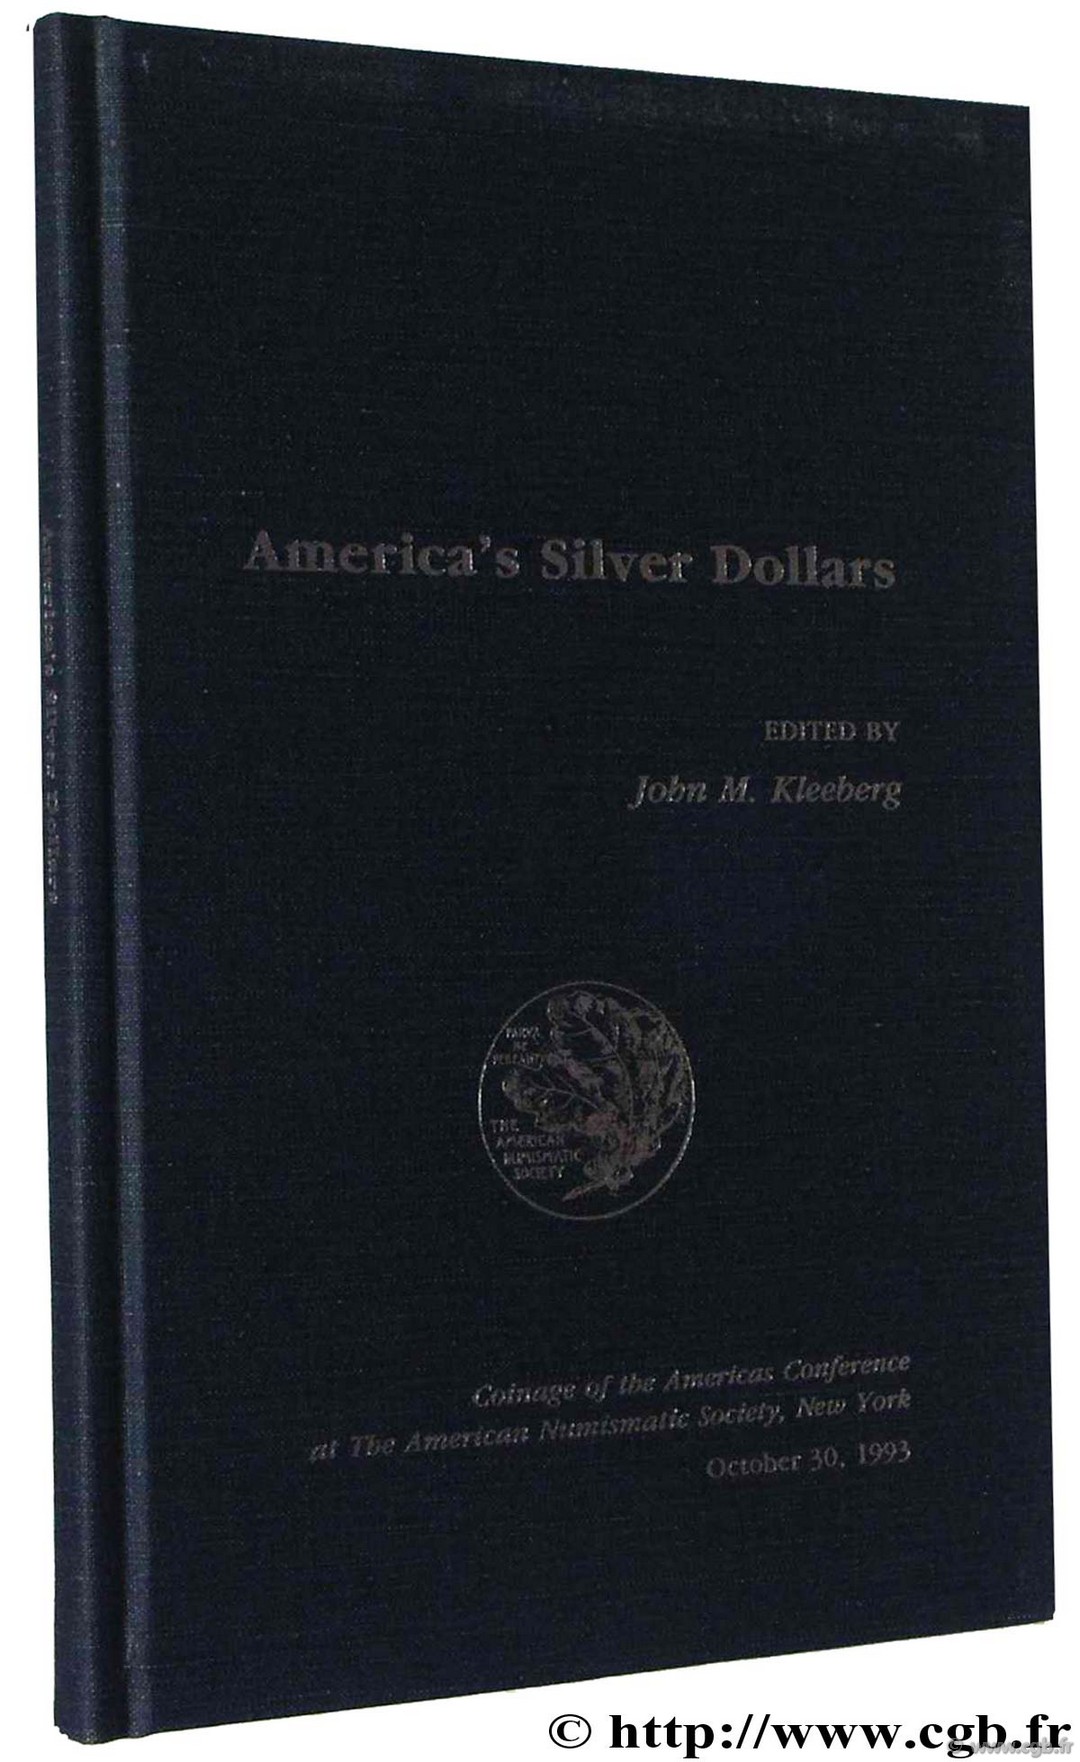 America s silver dollars - coinage of the americas conférence at the American Numismatic Society, New York October 30, 1993 